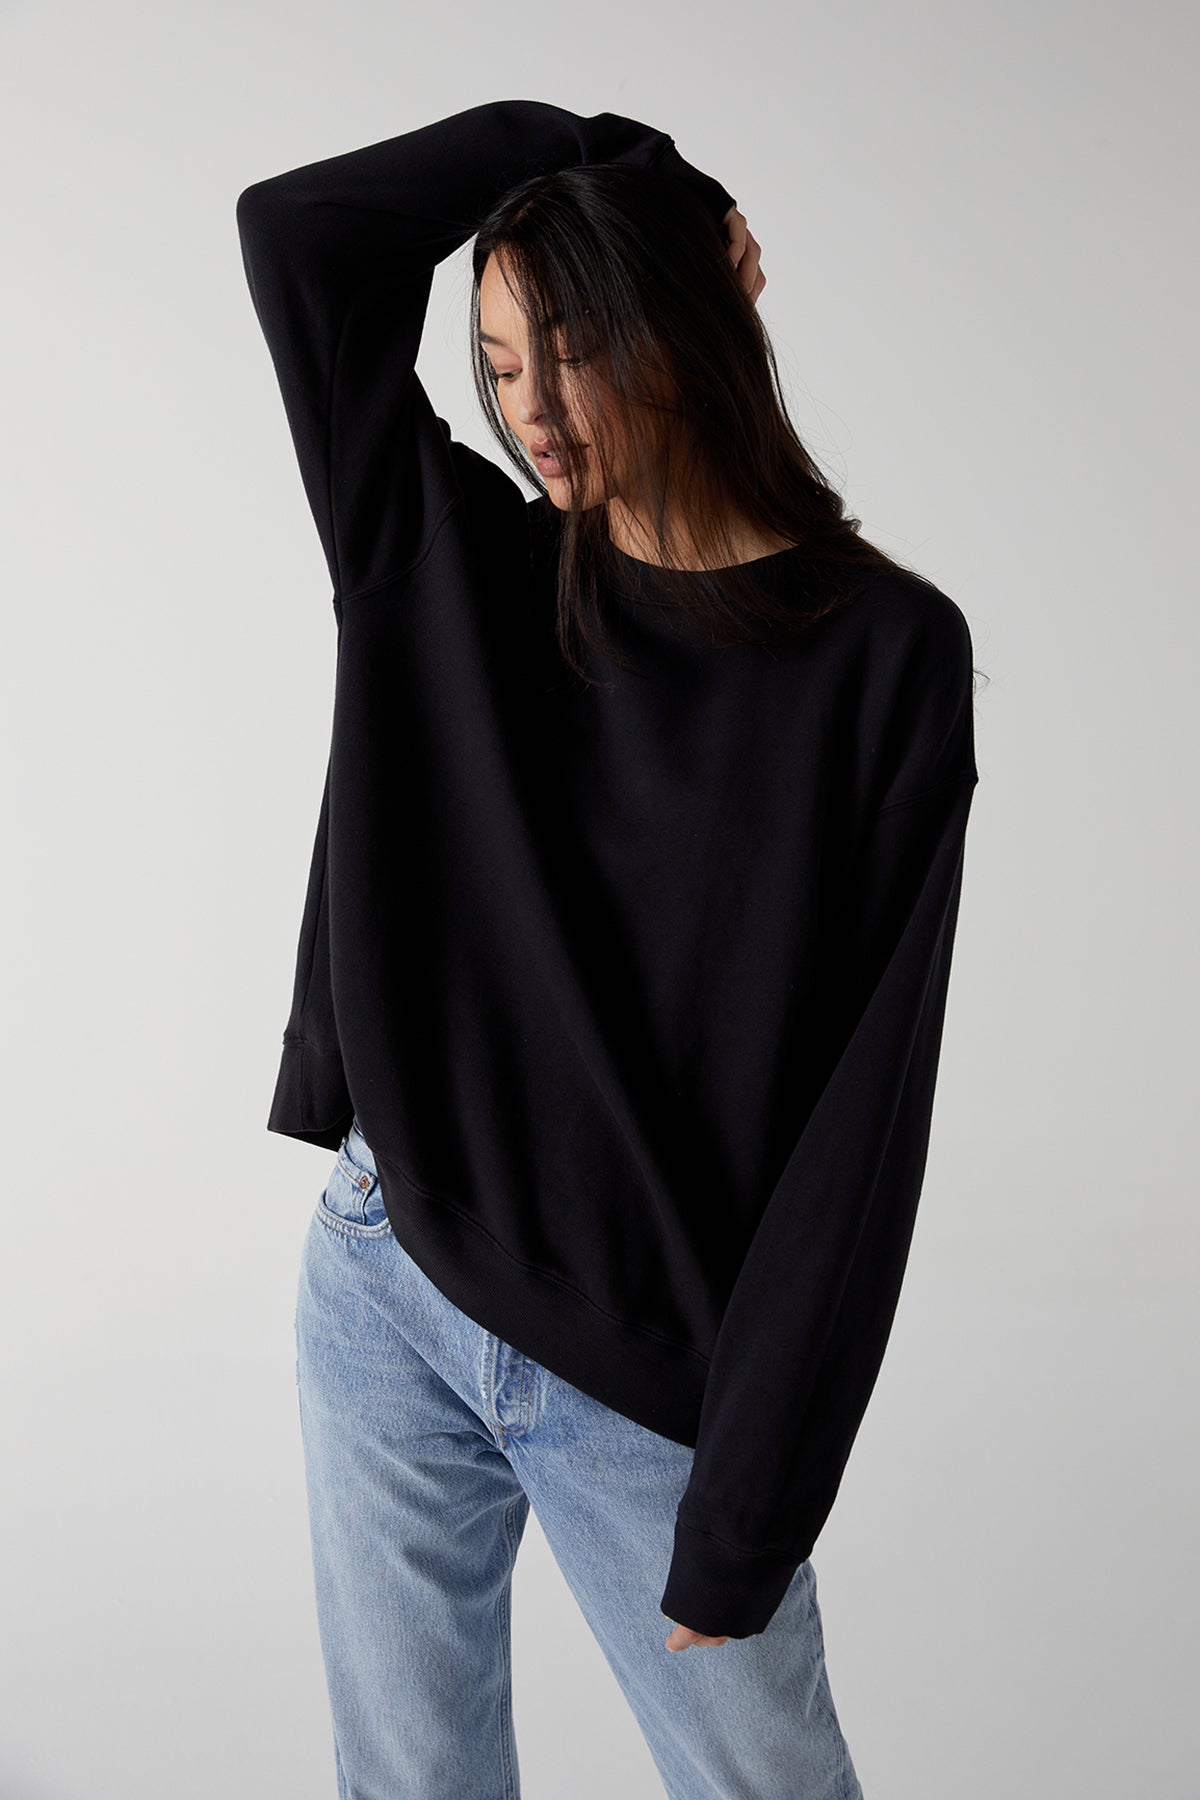 The model is wearing a black ABBOT SWEATSHIRT and jeans.-25483445829825